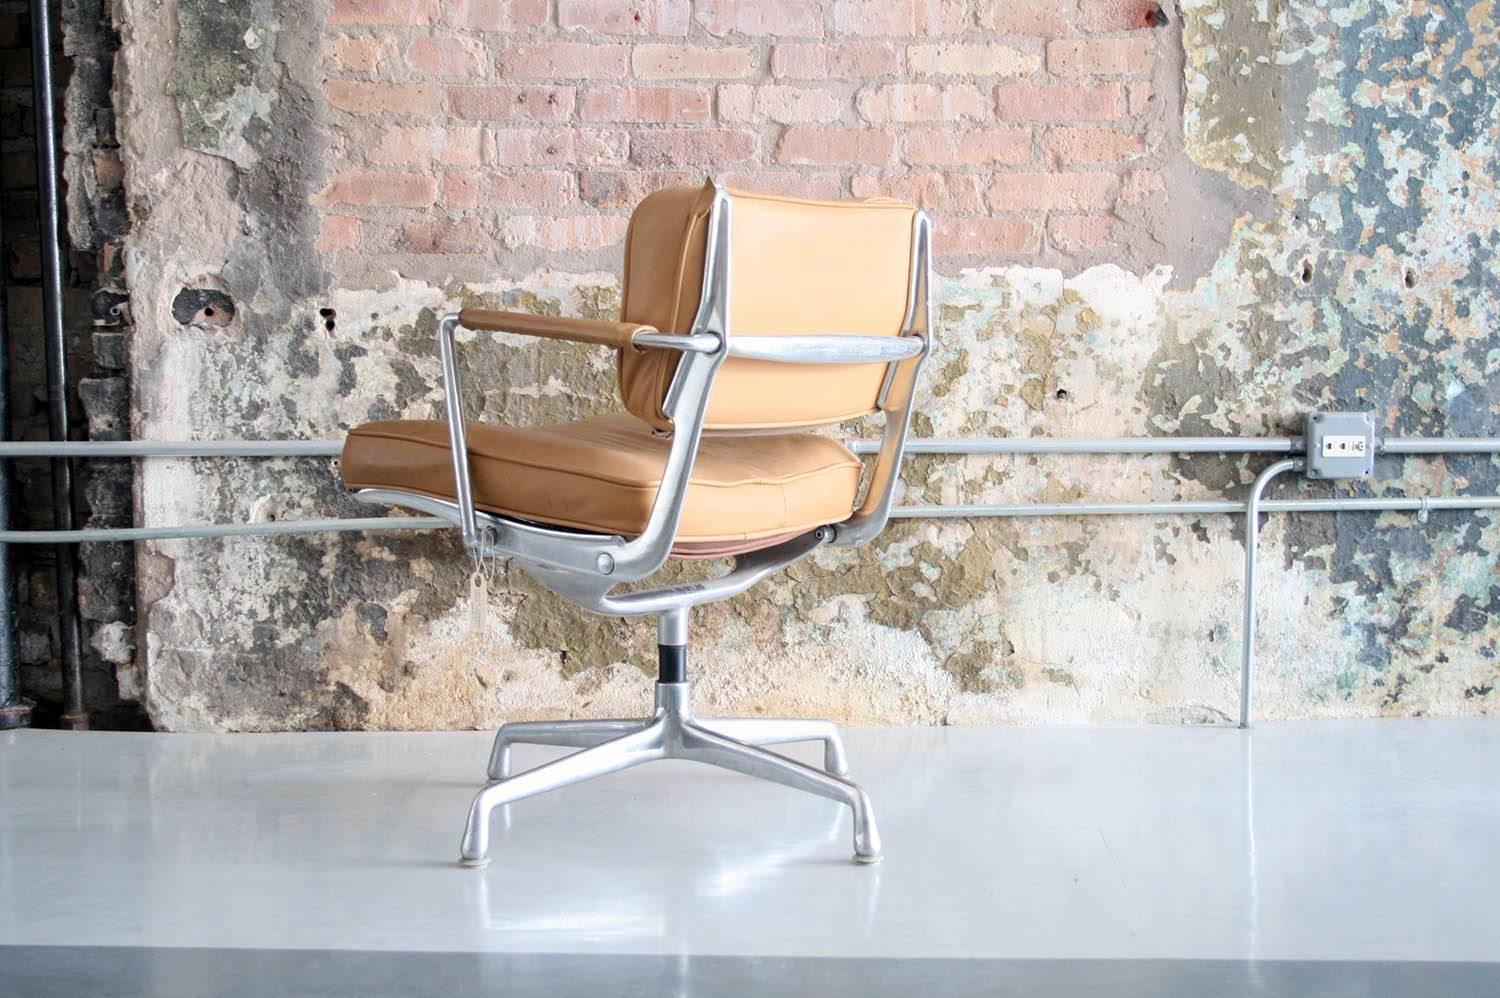 Charles and Ray Eames Intermediate chair in original leather upholstery and cast aluminium frame
introduced in 1968.

Charles and Ray called this design “intermediate” because it was intermediate in price and weight compared to other Eames